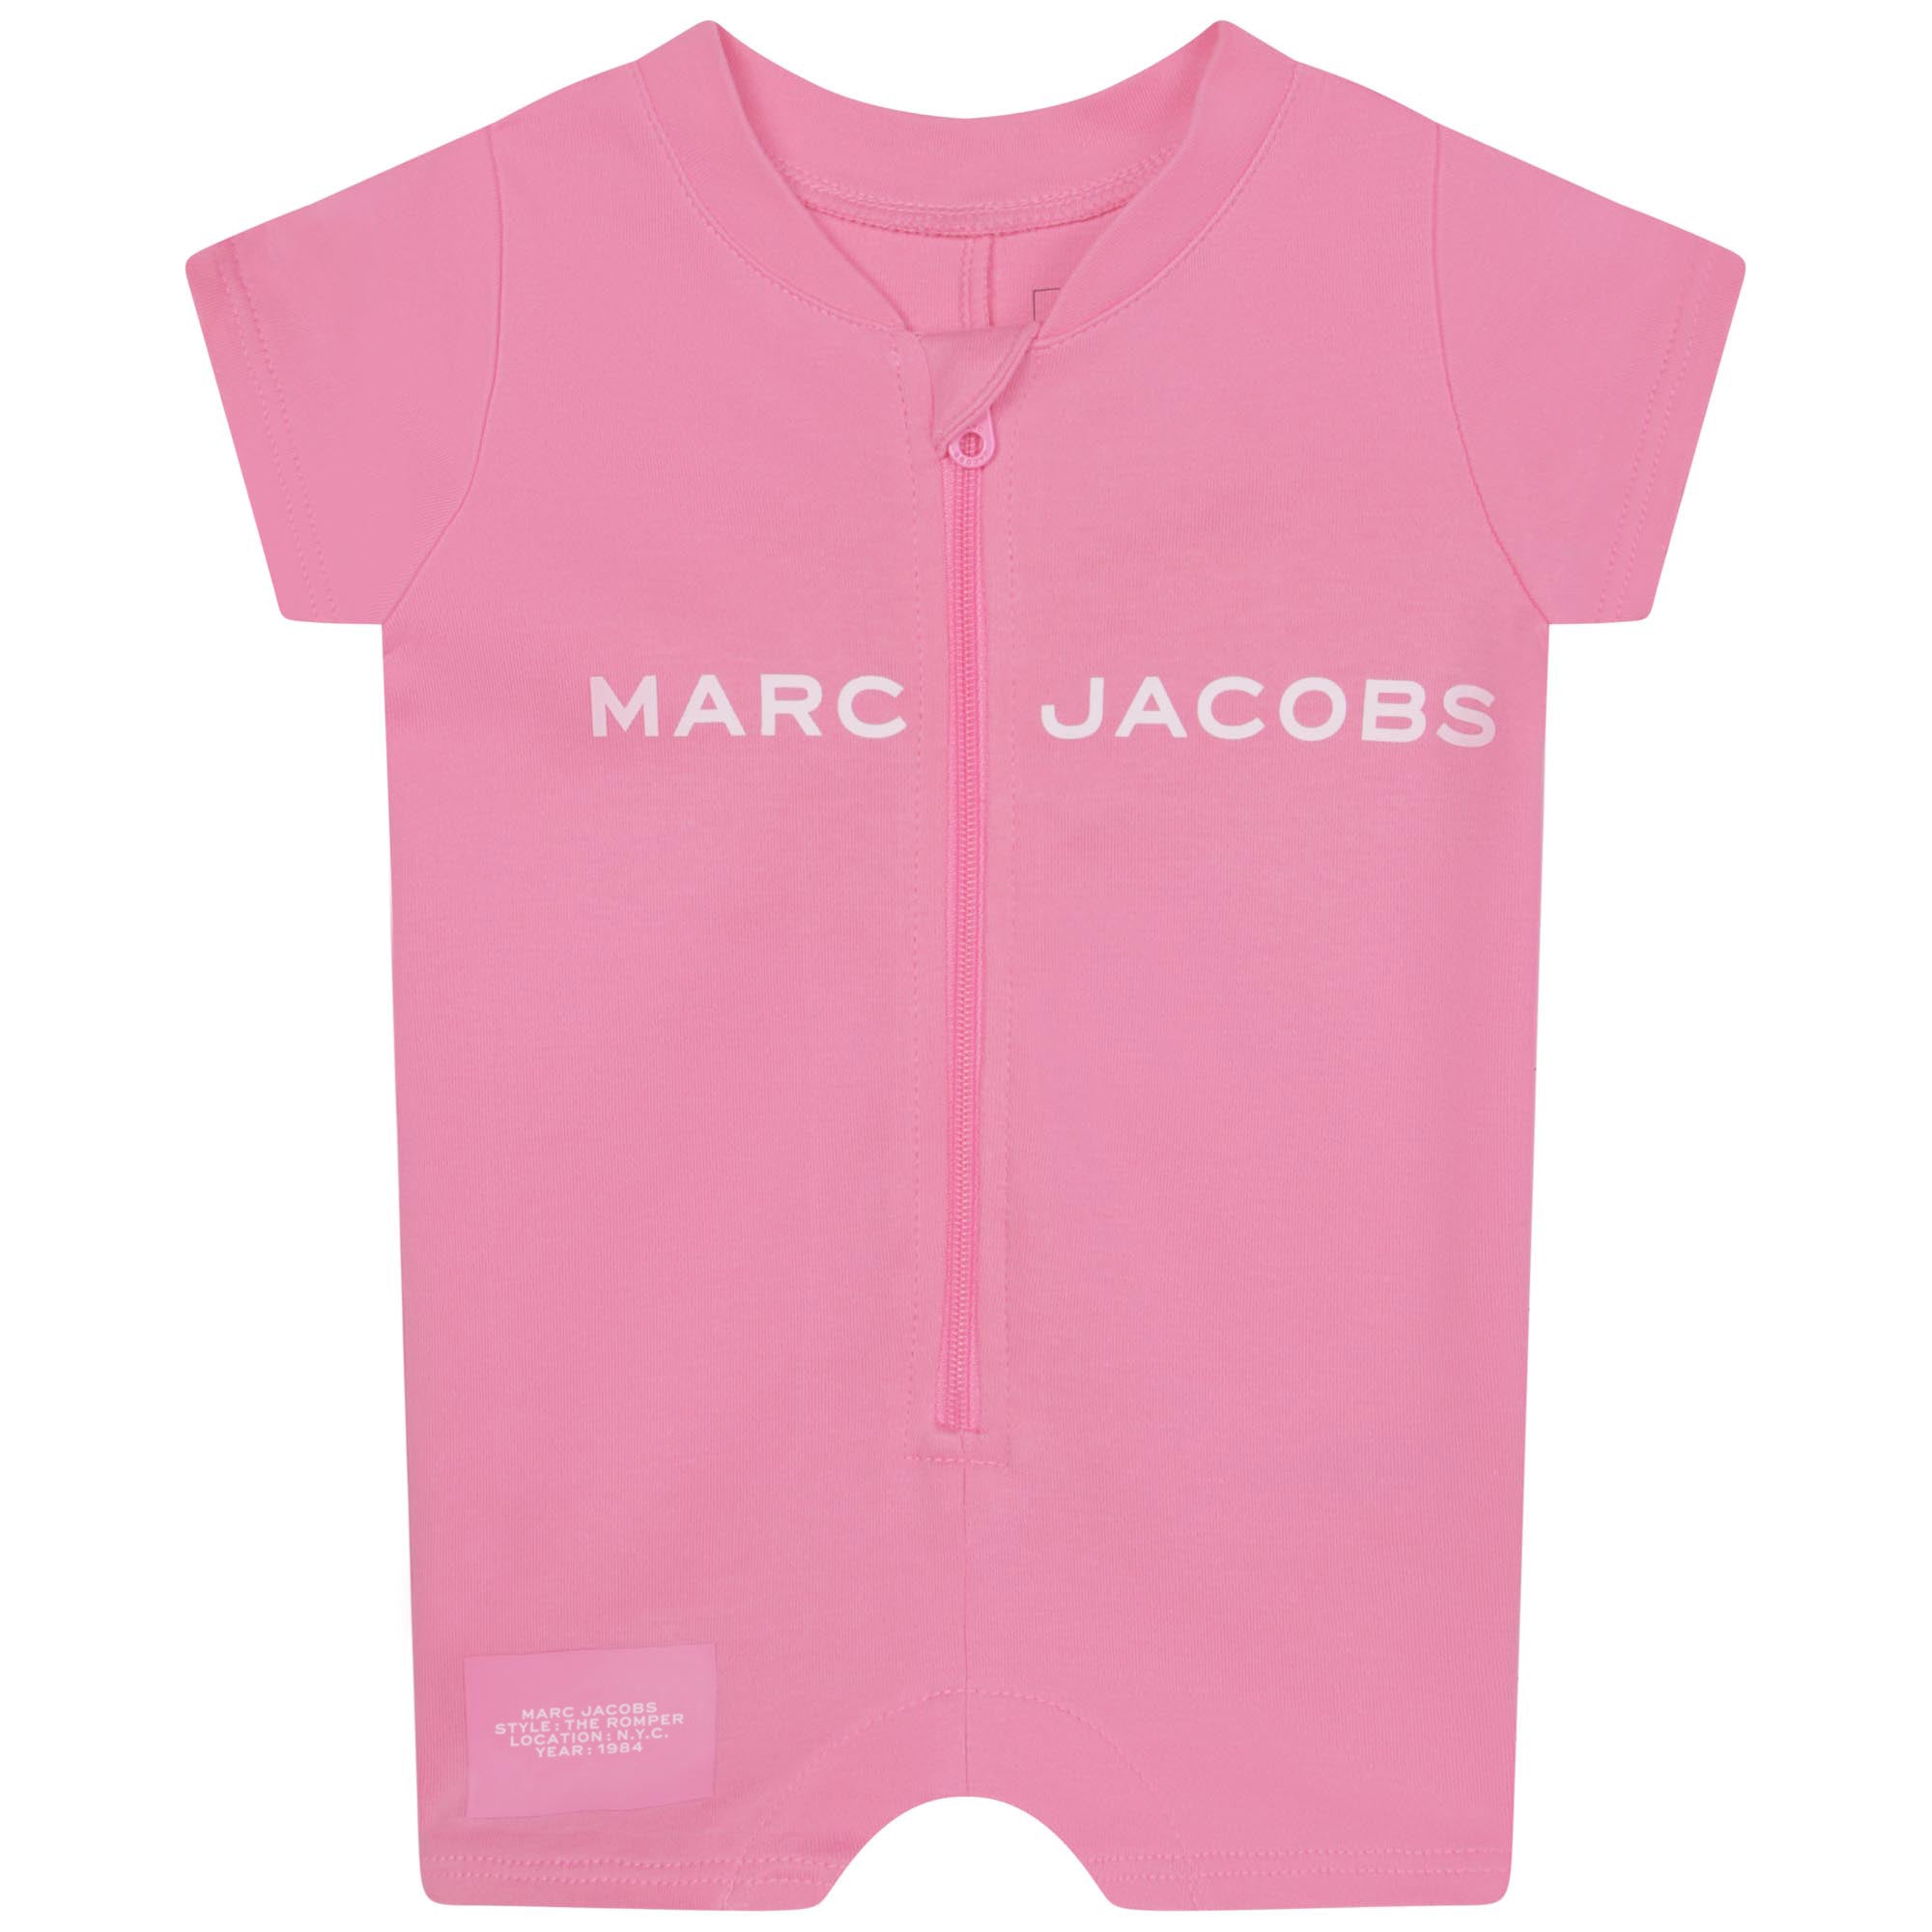 Marc Jacobs All In One Style: W94078